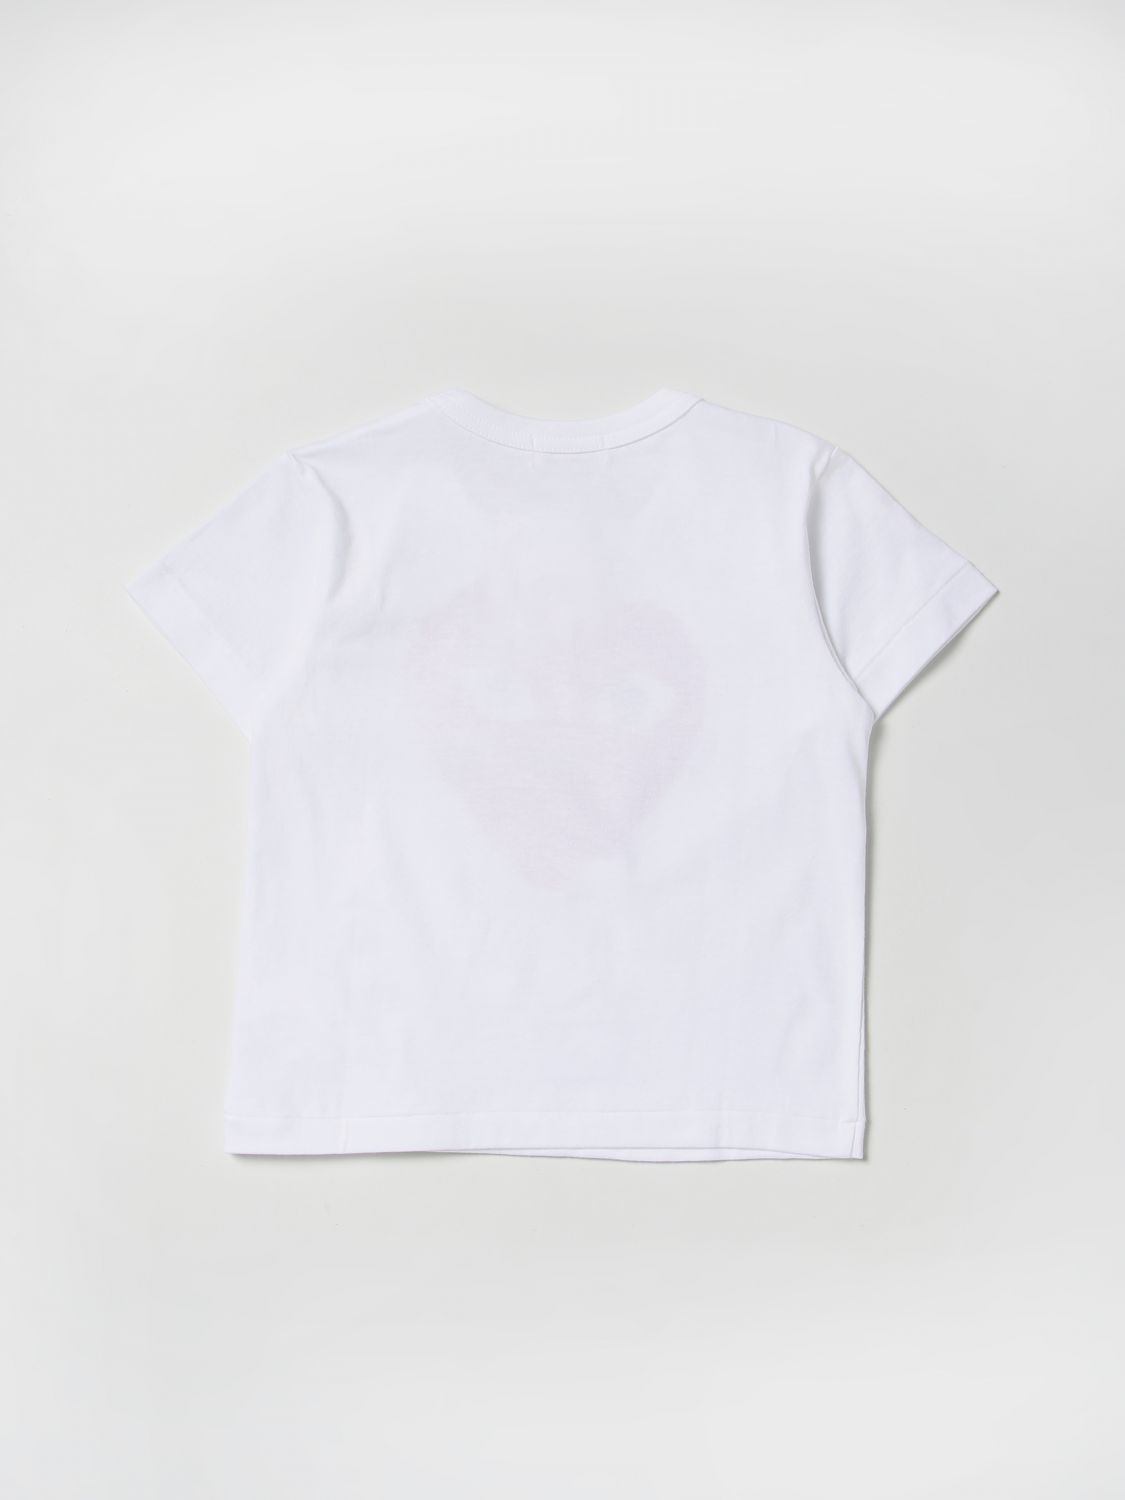 White baby t-shirt with red heart print